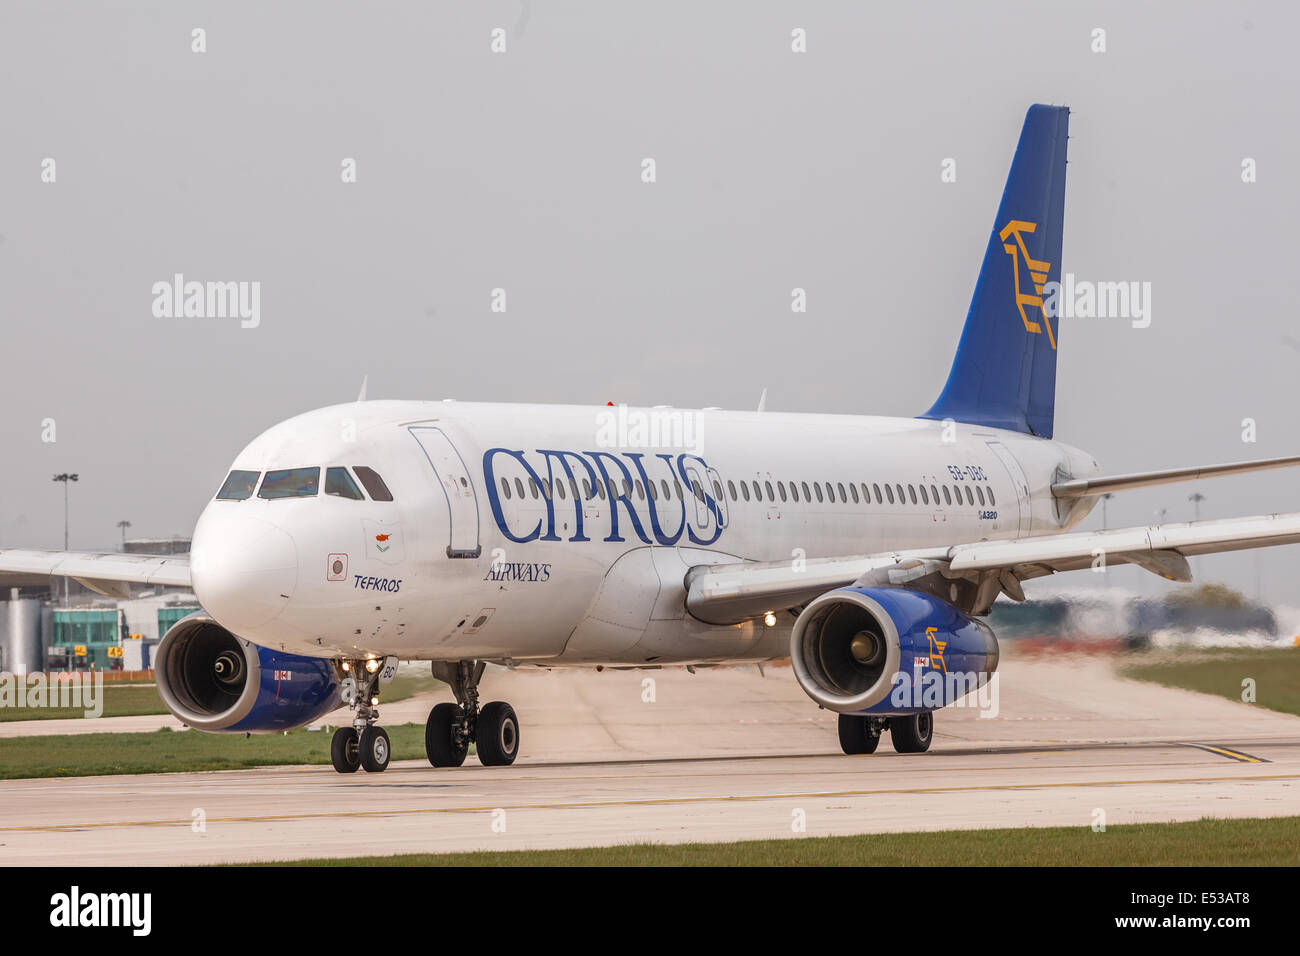 Cyprus Airways Airbus aircraft taxing at Manchester Ringway Airport Stock Photo